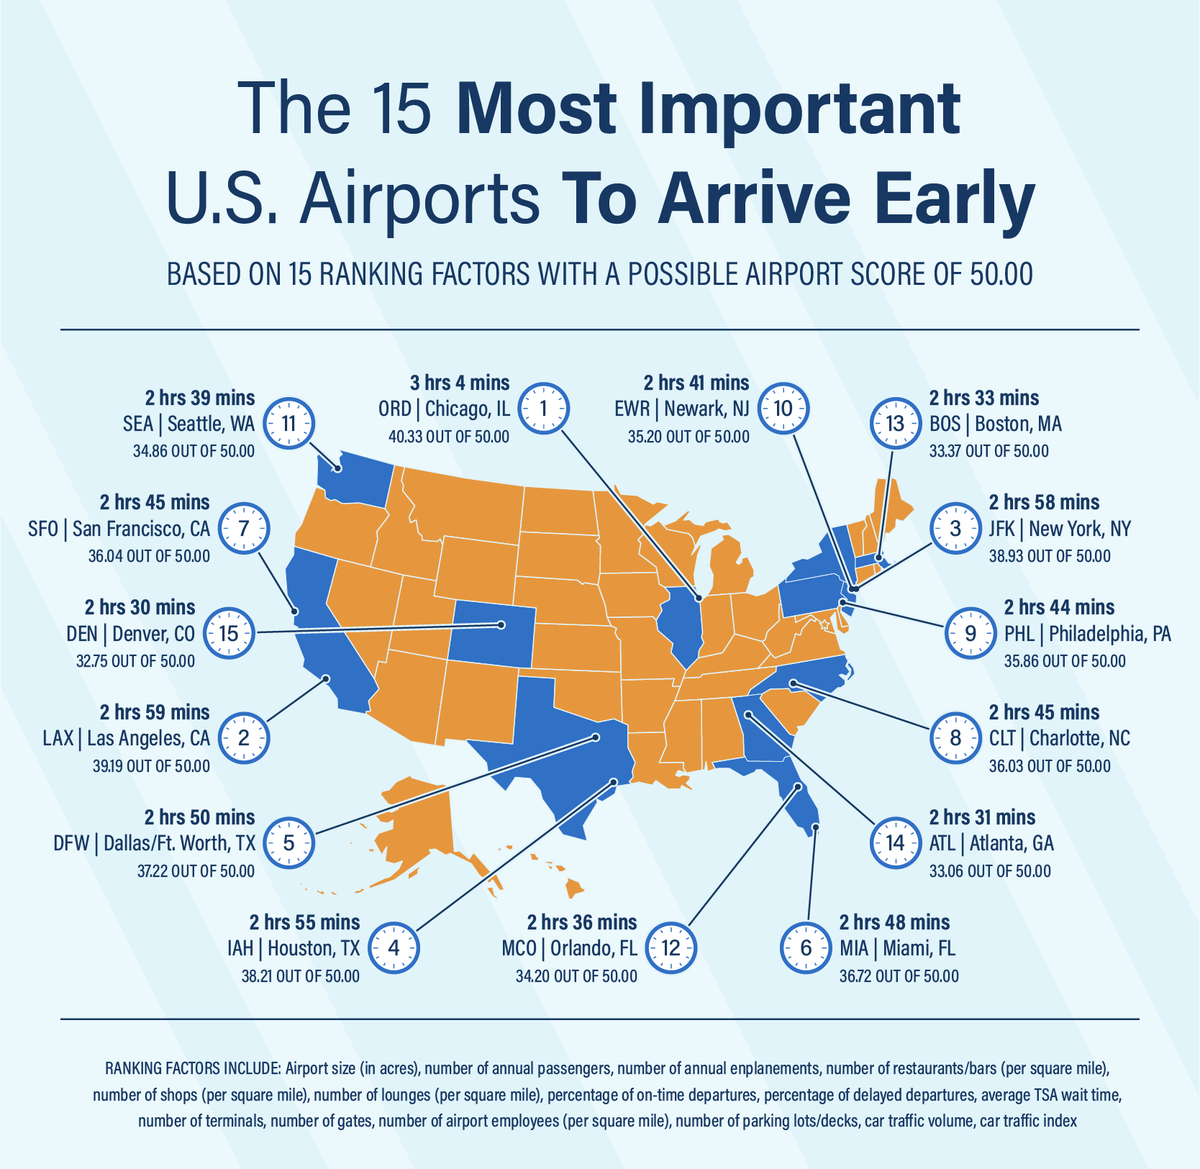 How Early To Arrive To Catch Your Flight at 50 U.S. Airports